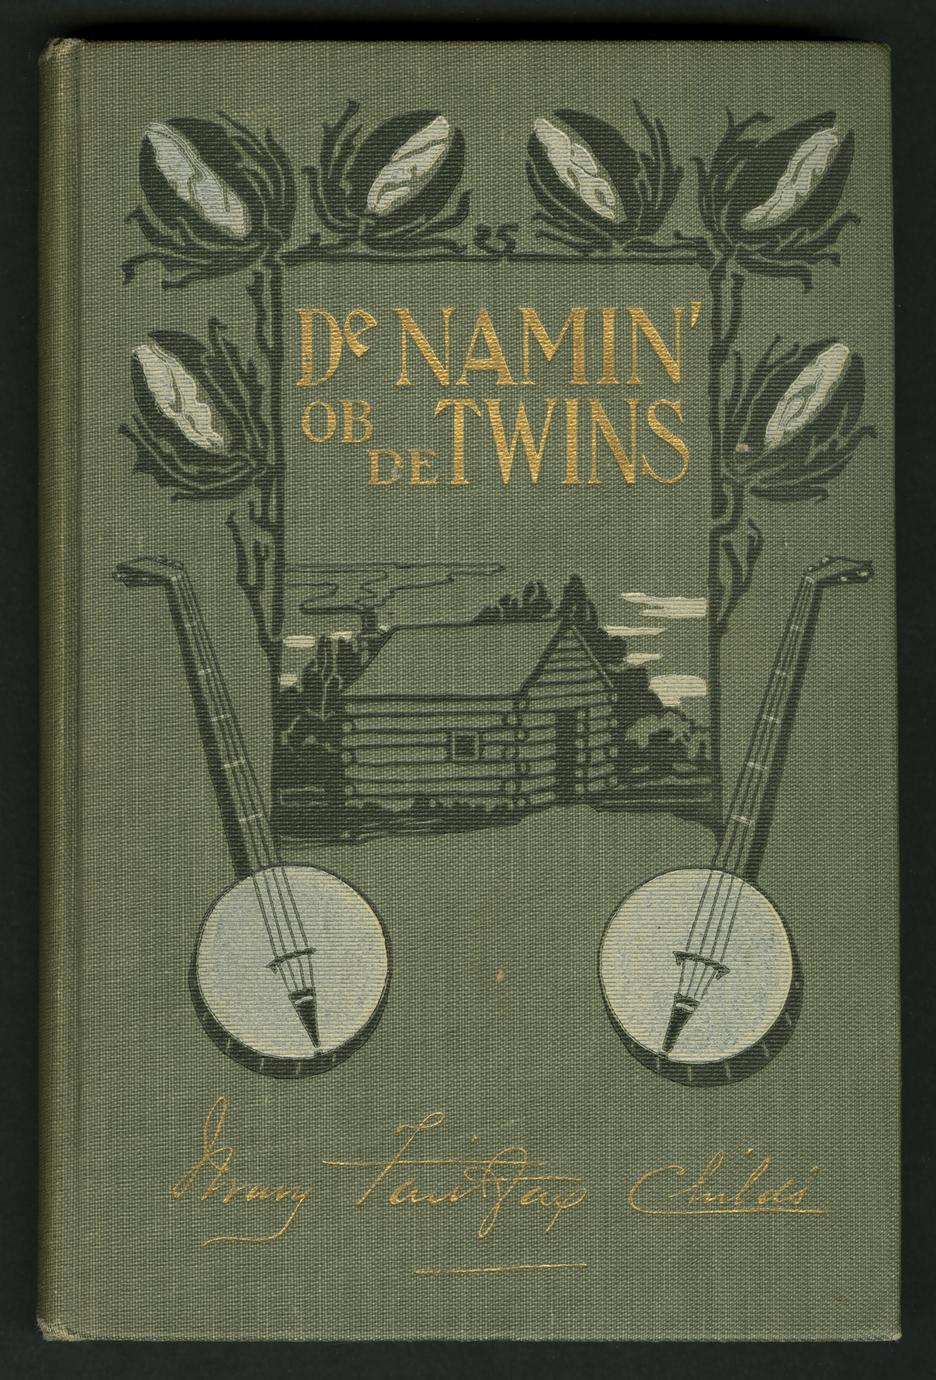 De namin' ob de twins : and other sketches from the cotton land (1 of 2)